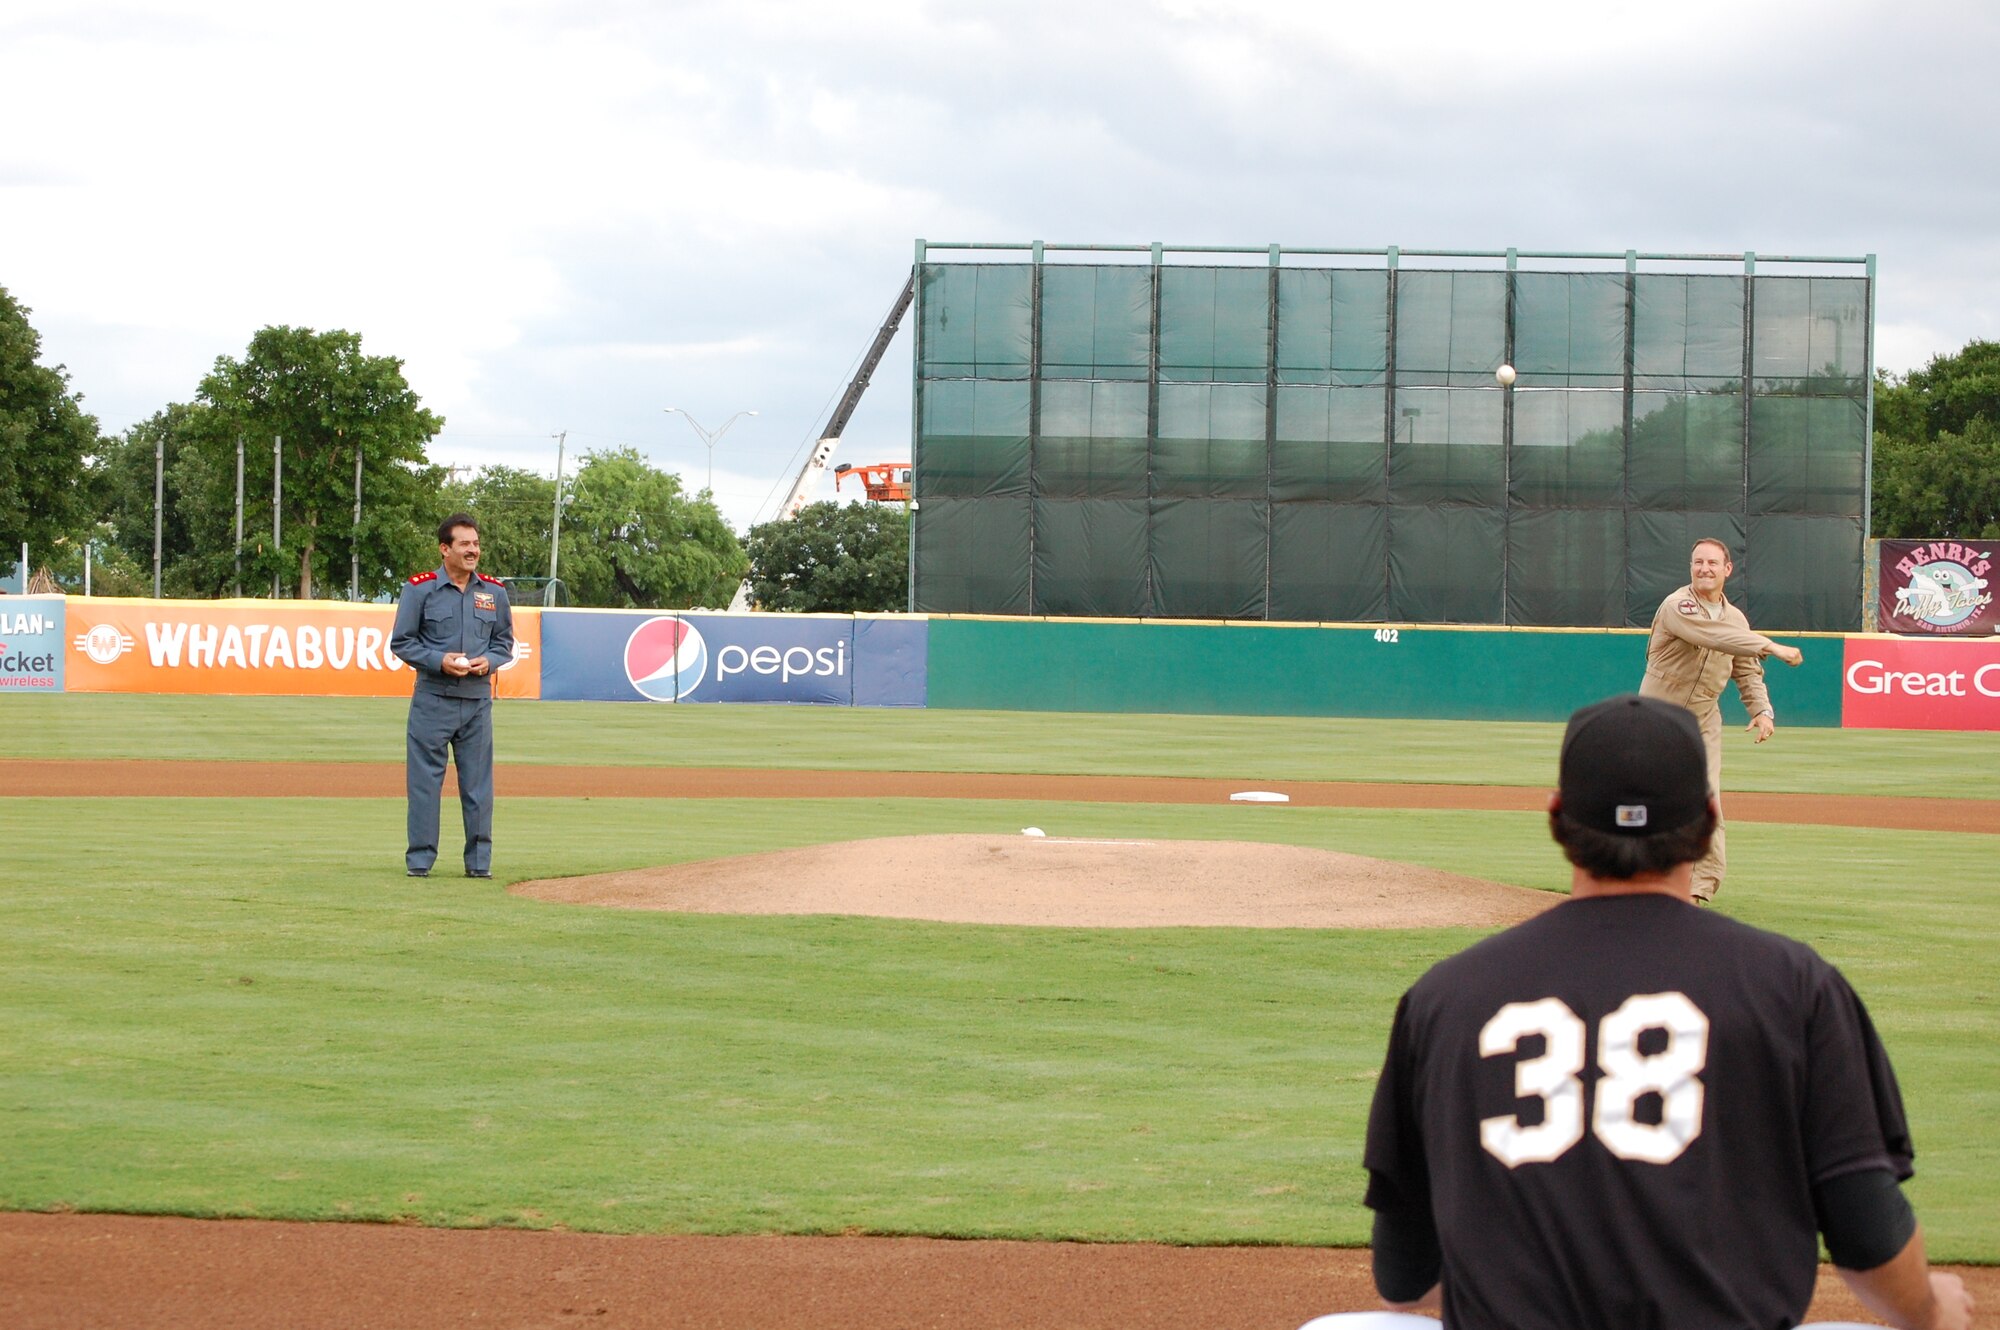 Brig. Gen. Michael Boera, Coalition Air Power Transition Force commanding general, right, and Maj. Gen. Mohammad Dawran, Afghan National army air corps, left, throw out the dual-first pitch of the game May 23, at Wolf Stadium in San Antonio, Texas. General Dawran is visiting Air Education and Training Command to receive updated information on current and future security assistance and cooperation training for the ANAAC. General Boera is working to stand up a robust ANAAC center of excellence and he is exploring more in-depth maintenance training between the two nations. Since the establishment of the Kabul Air Corps Training Center in 2007, in Afghanistan, more than 1,100 Afghani military members have received training in air corps orientation, air traffic control, fire fighting, aircraft maintenance, loadmaster duties and gunner training. (U.S. Air Force photo/Master Sgt. Paul Kilgallon) 